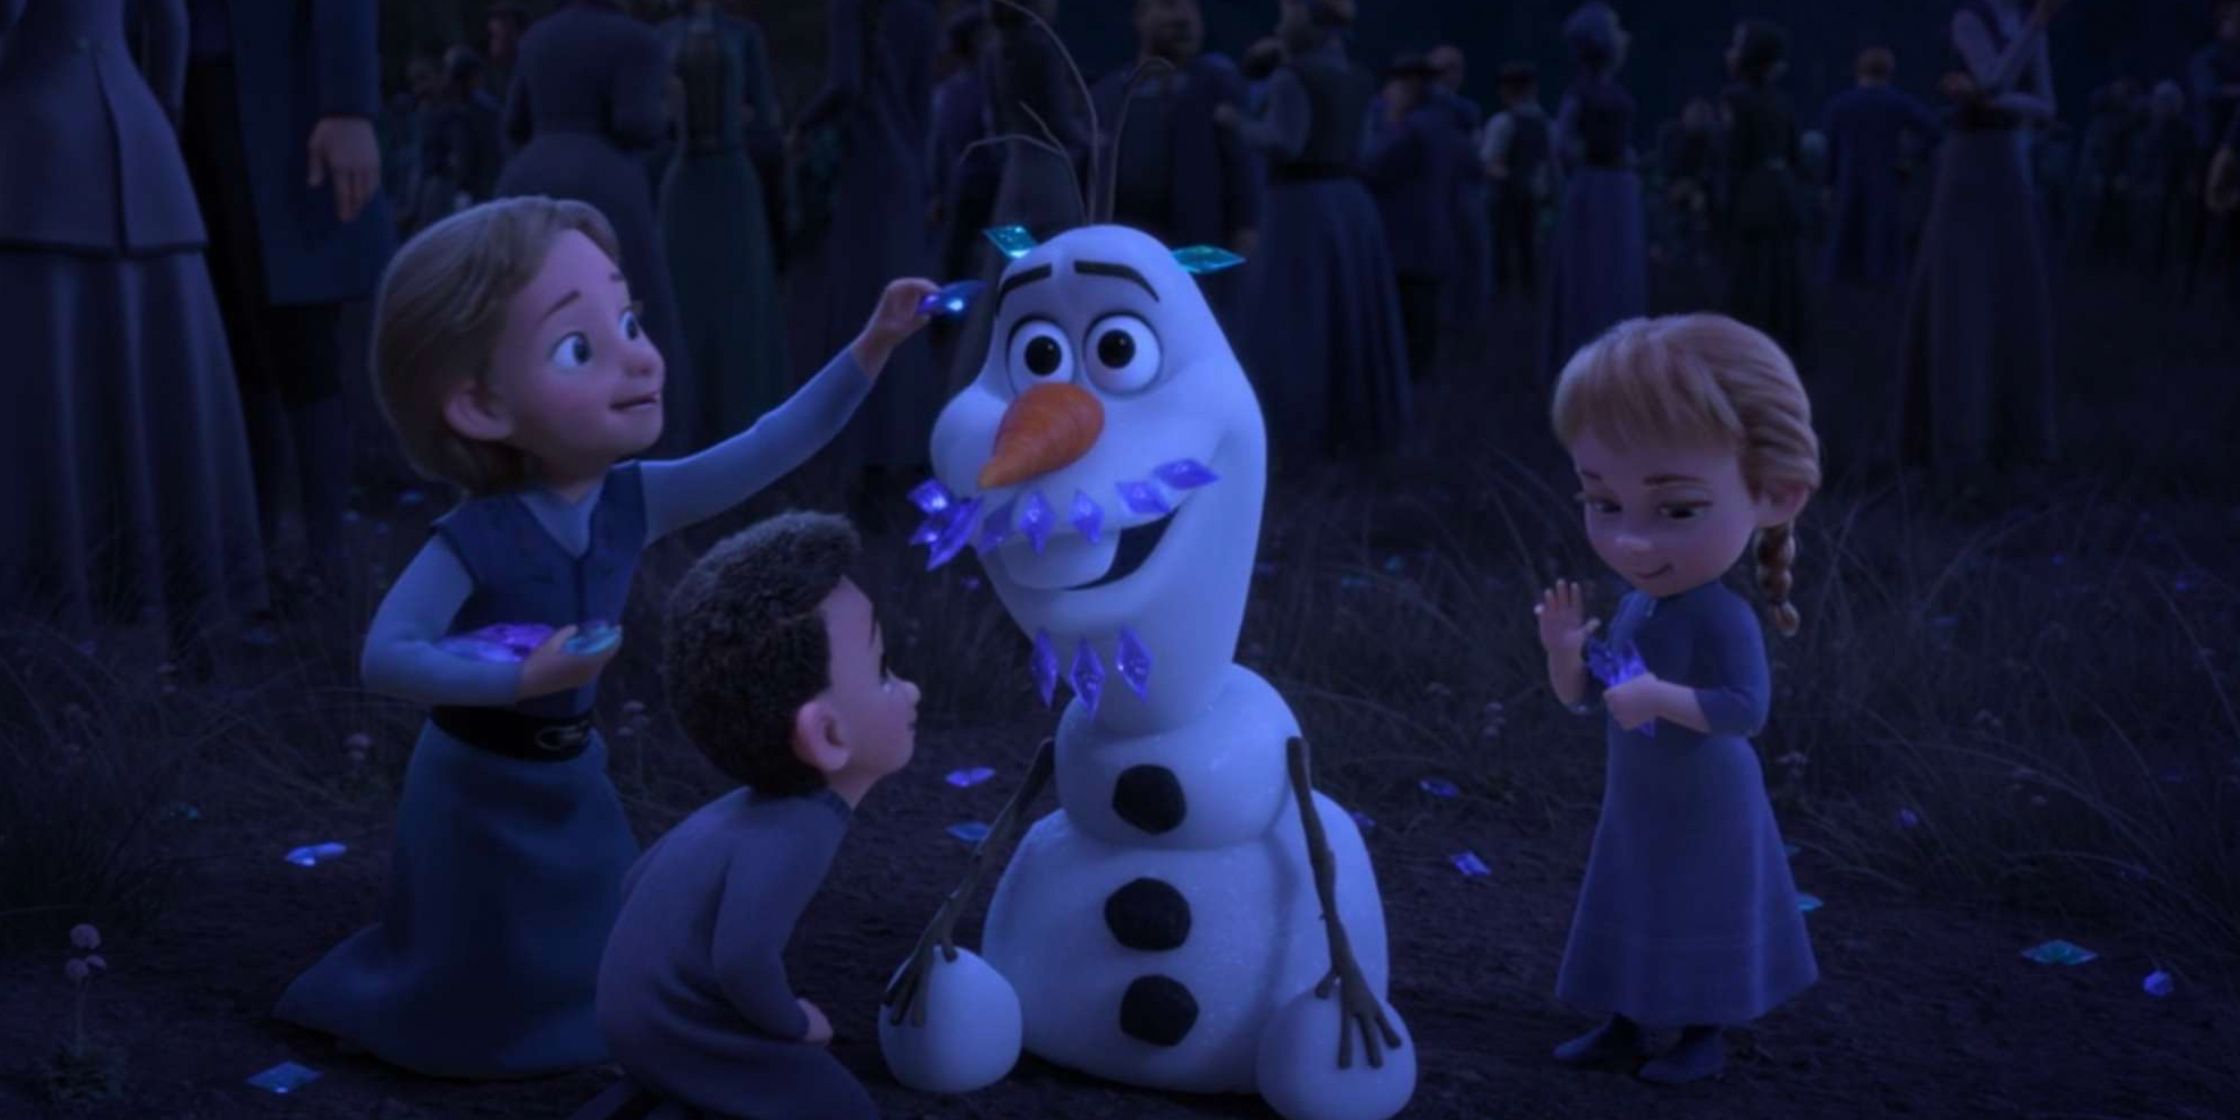 Kids playing with Olaf in Frozen 2